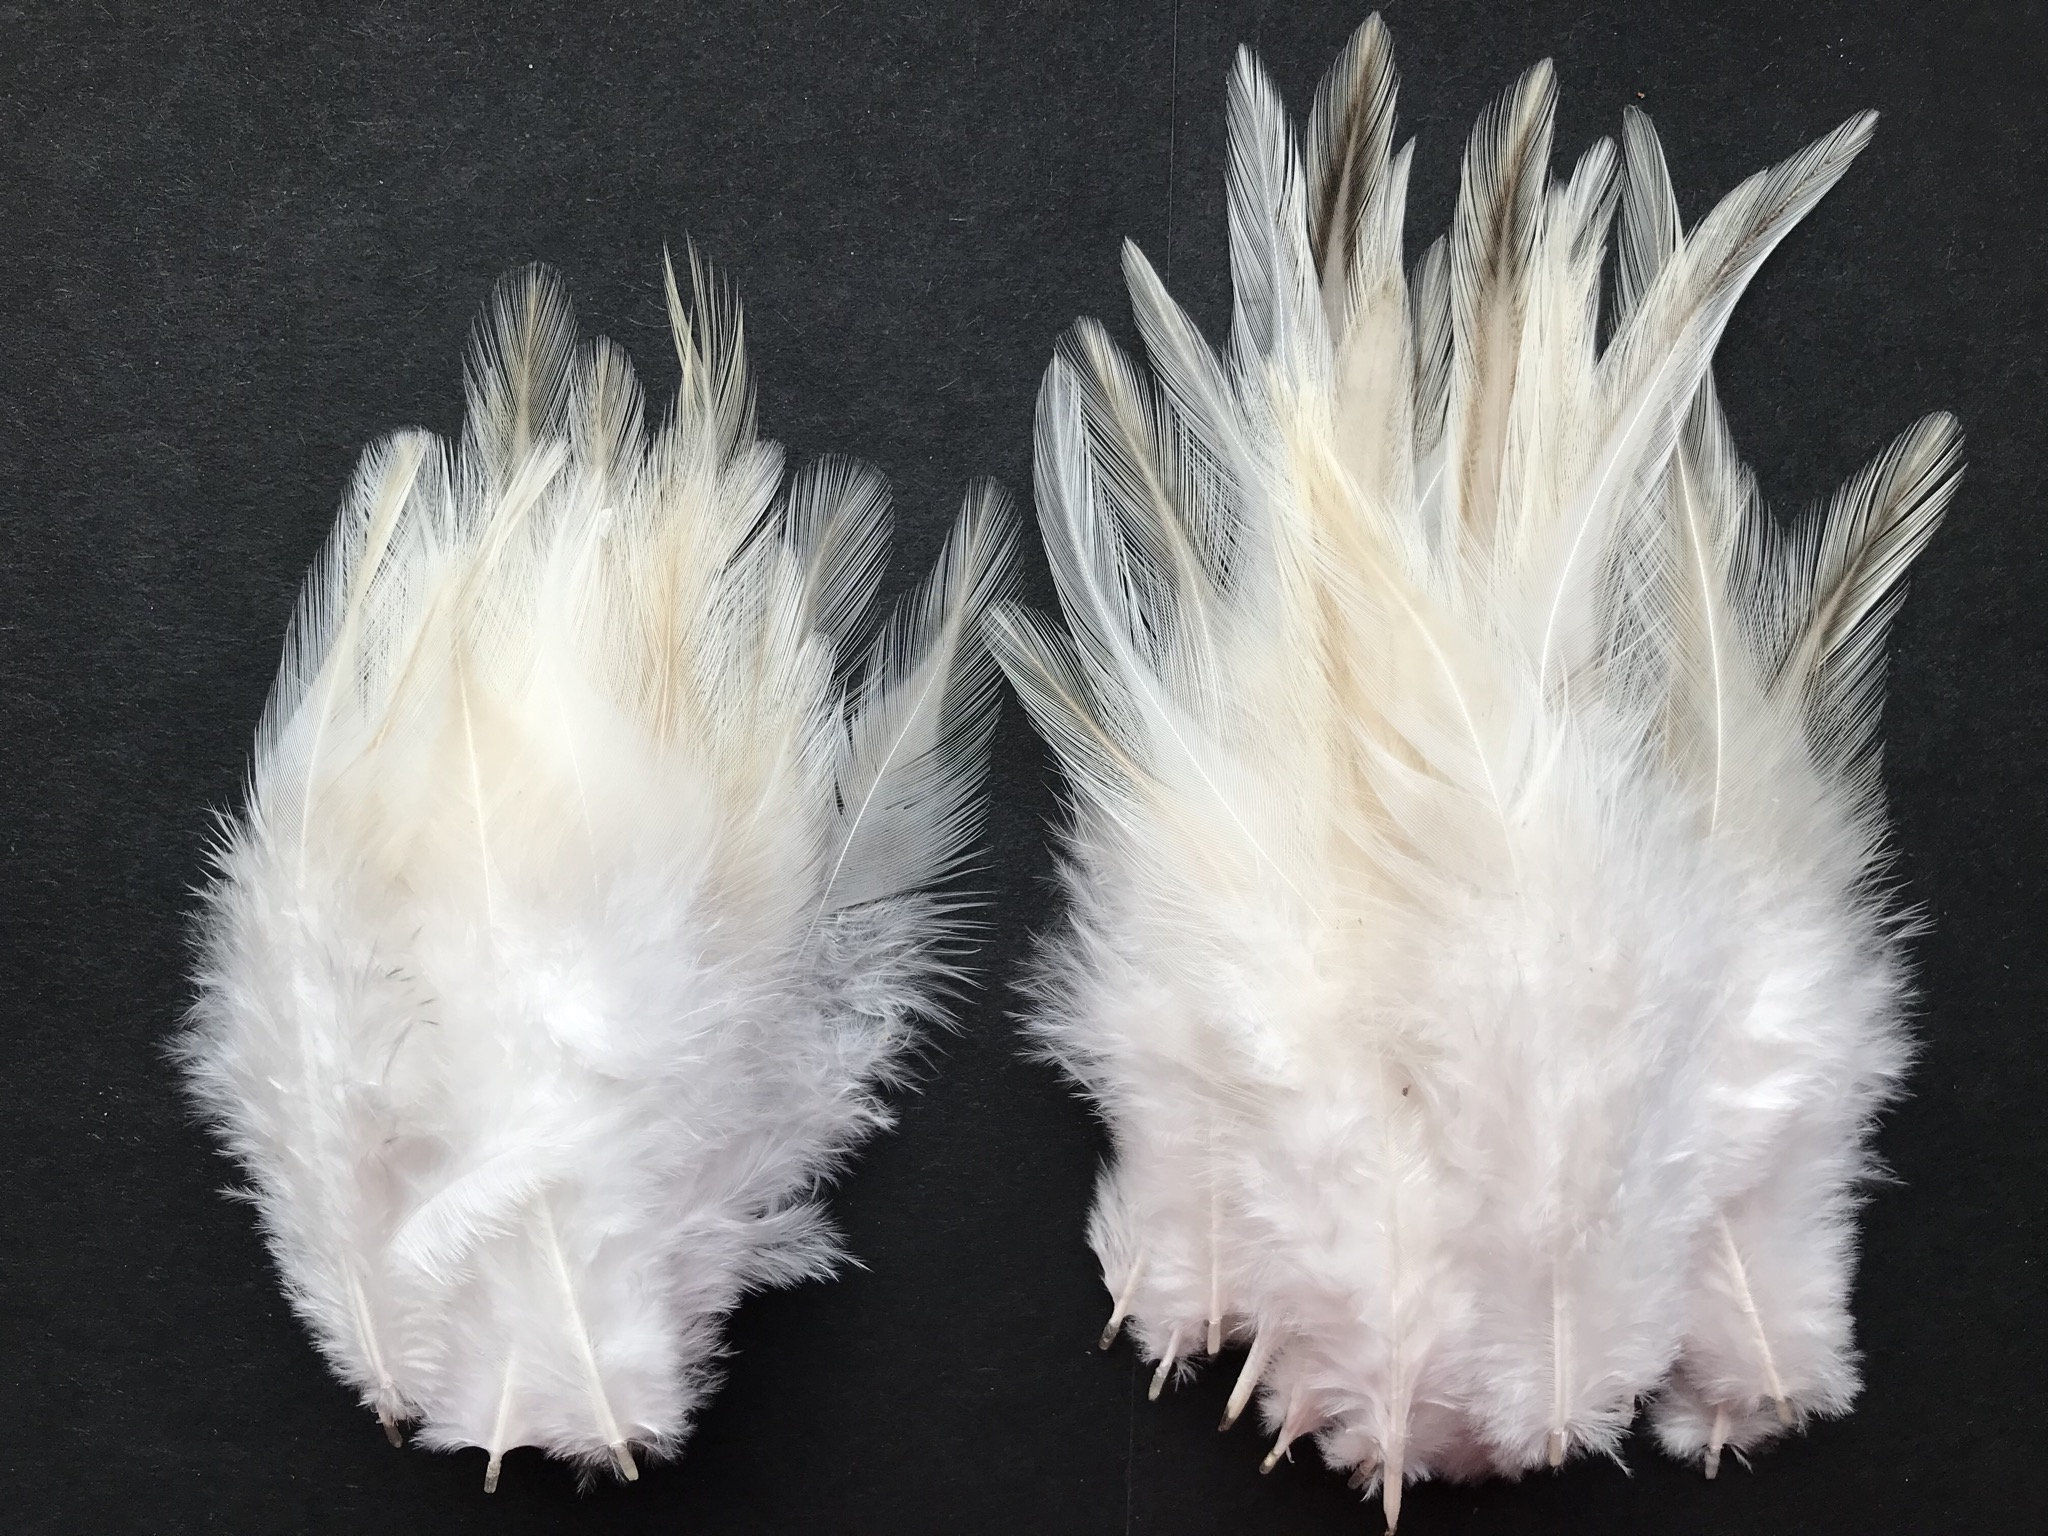 Marabou Feather Puffs, Marabou Puffs, Feather Puffs, Marabou Feathers,  Curly Feathers, Feather BOA , Wholesale Feather Puffs, Choose Colors 